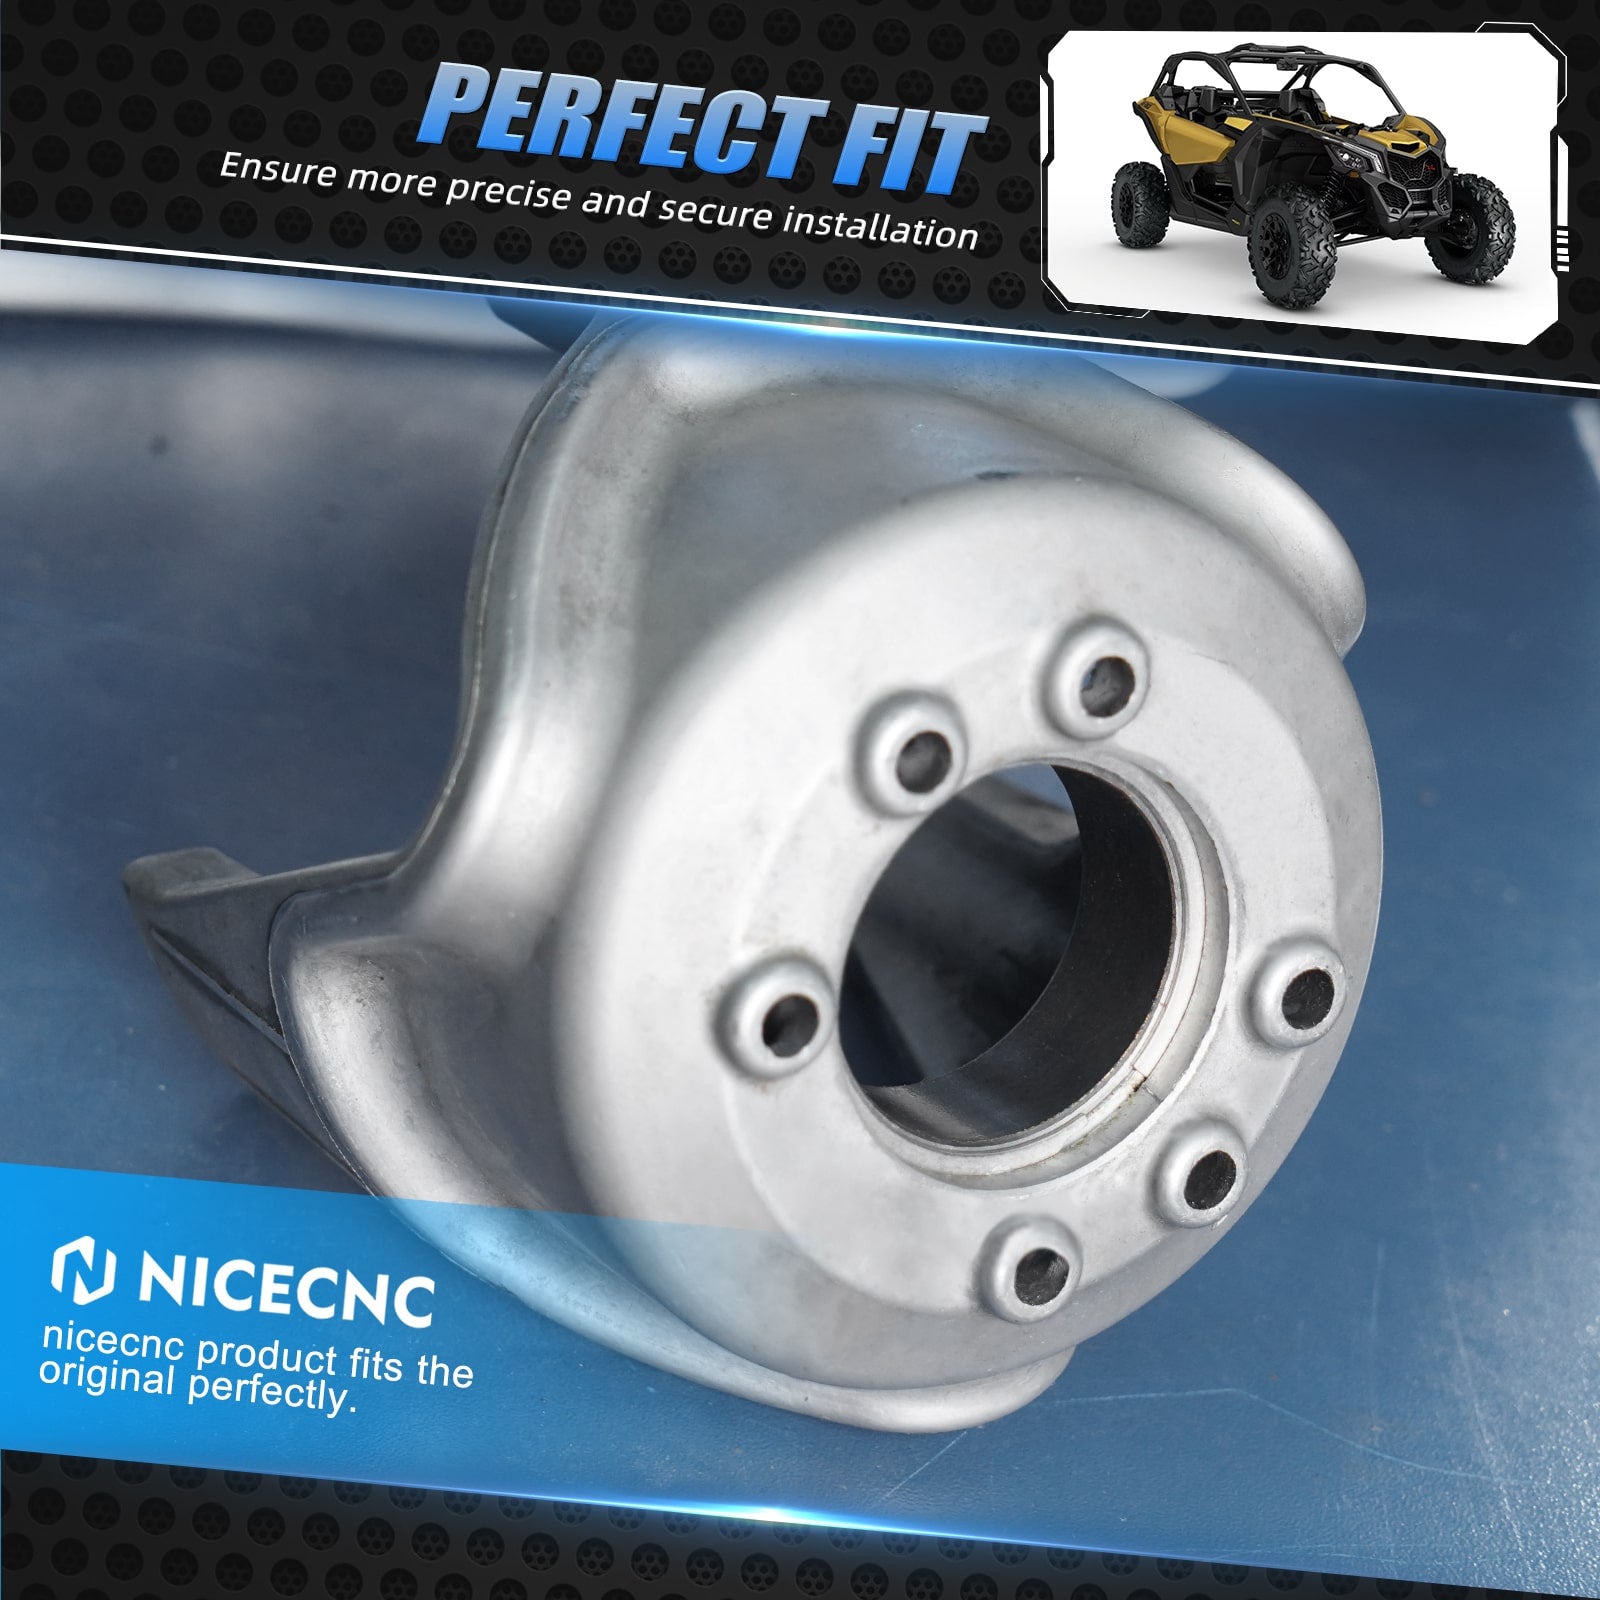 Secondary Clutch Cam Bushing Driven Pulley Inner Half Bushing Oilless Bushing For Can Am X3